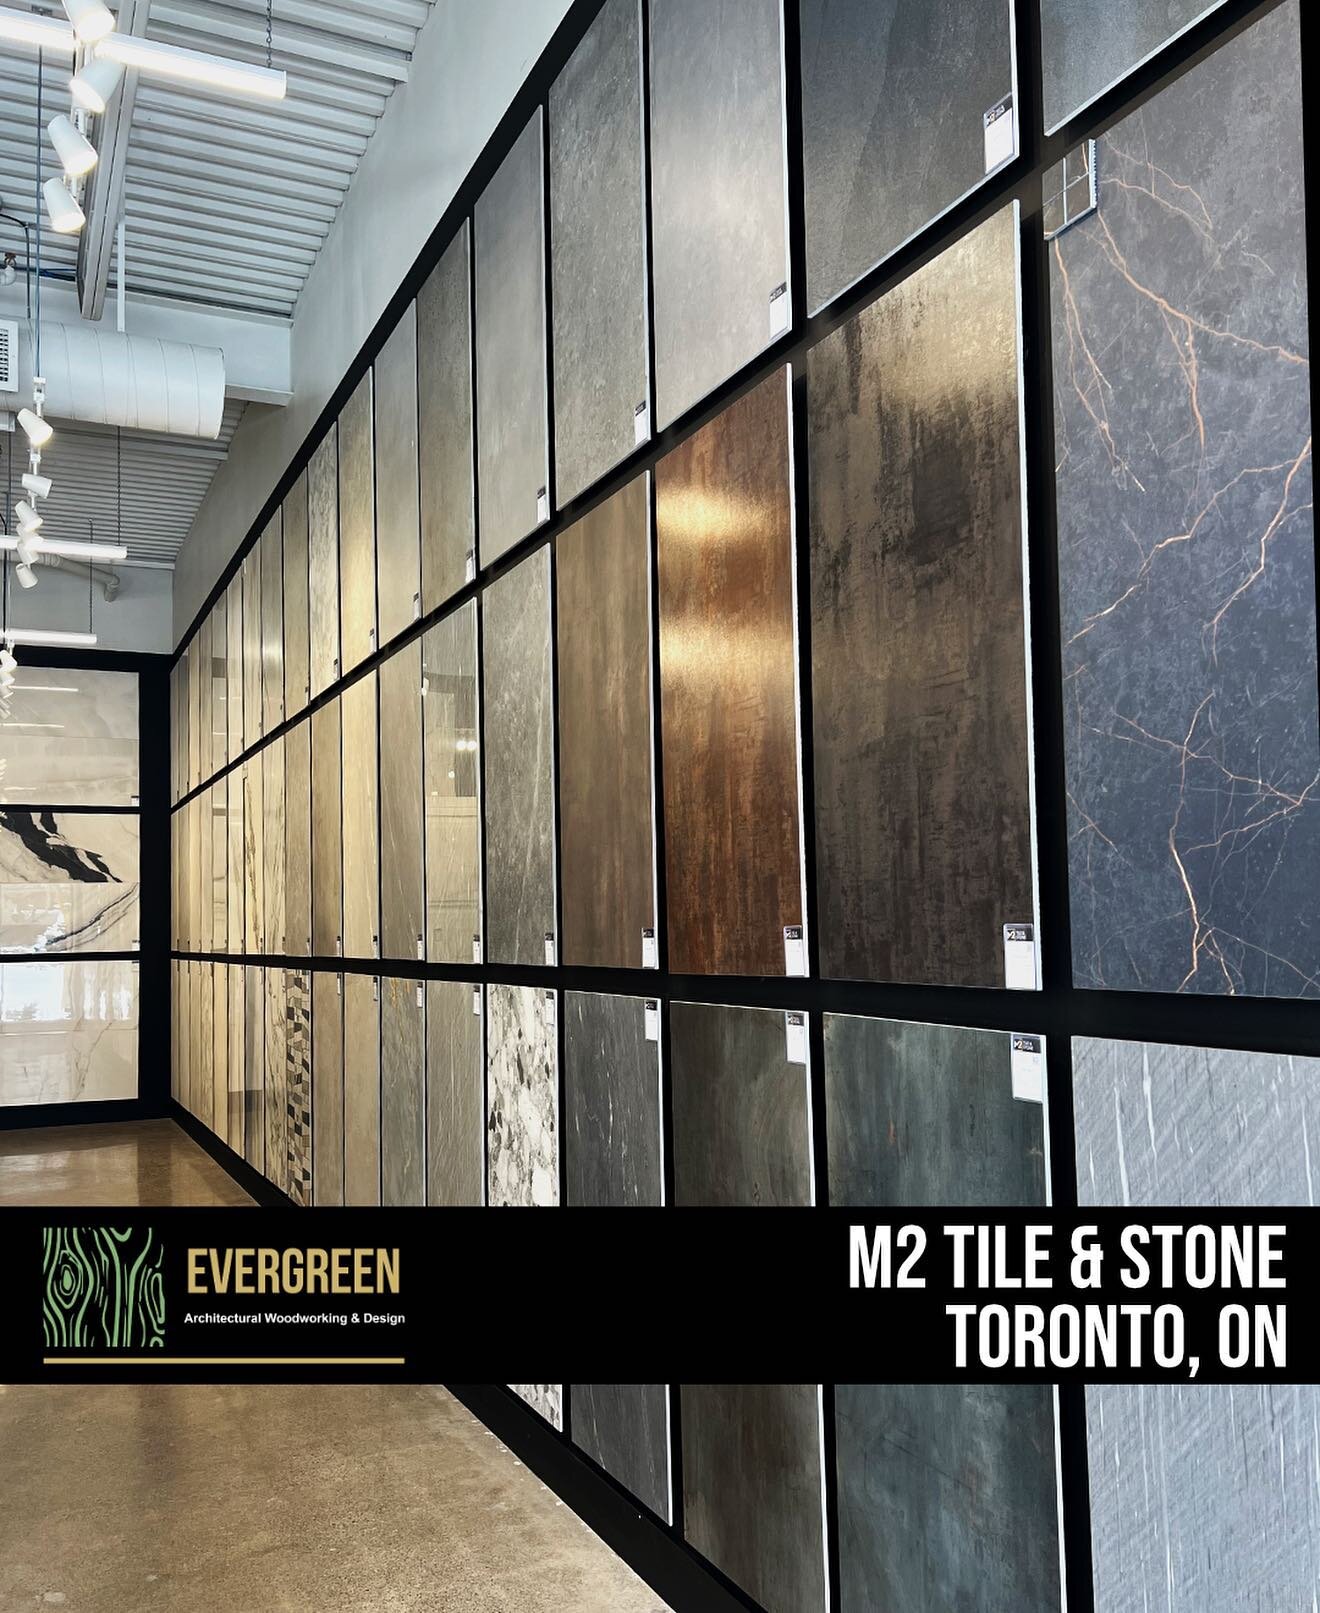 A replaceable display unit that allows @m2tilestone to showcase their impressive collection 💯
*
*
*
As a One Stop Millwork Shop, our team of carpenters fabricate these units in-house and install them on location 👀providing you with everything you n